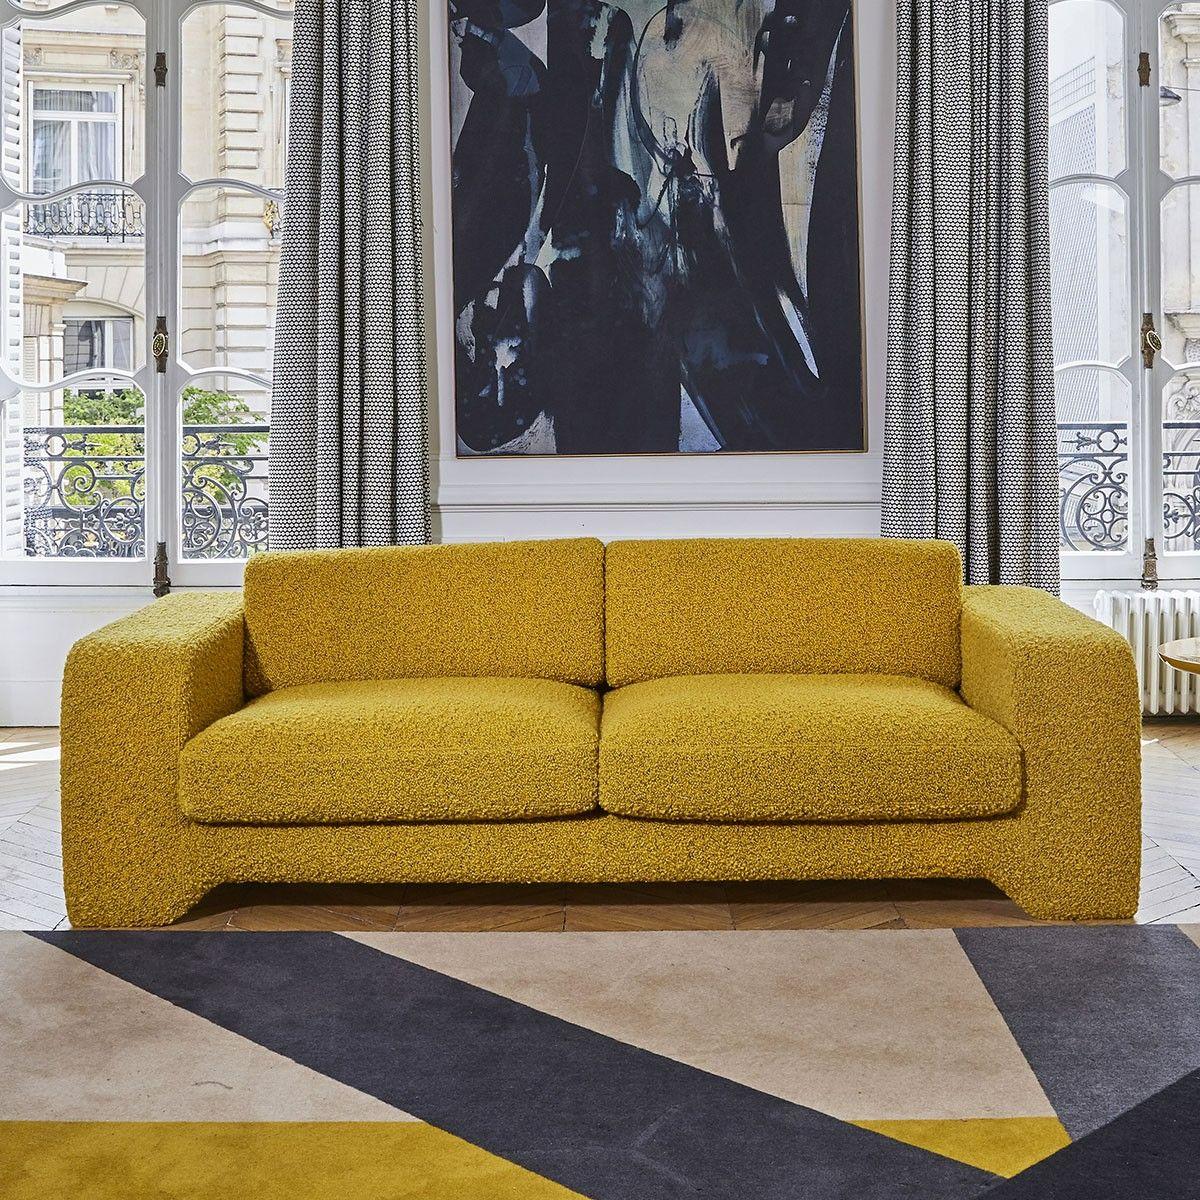 Popus Editions Giovanna 3 seater sofa in orange Verone velvet upholstery

Giovanna is a sofa with a strong profile. A sober, plush line, with this famous detail that changes everything, so as not to forget its strength of character and this